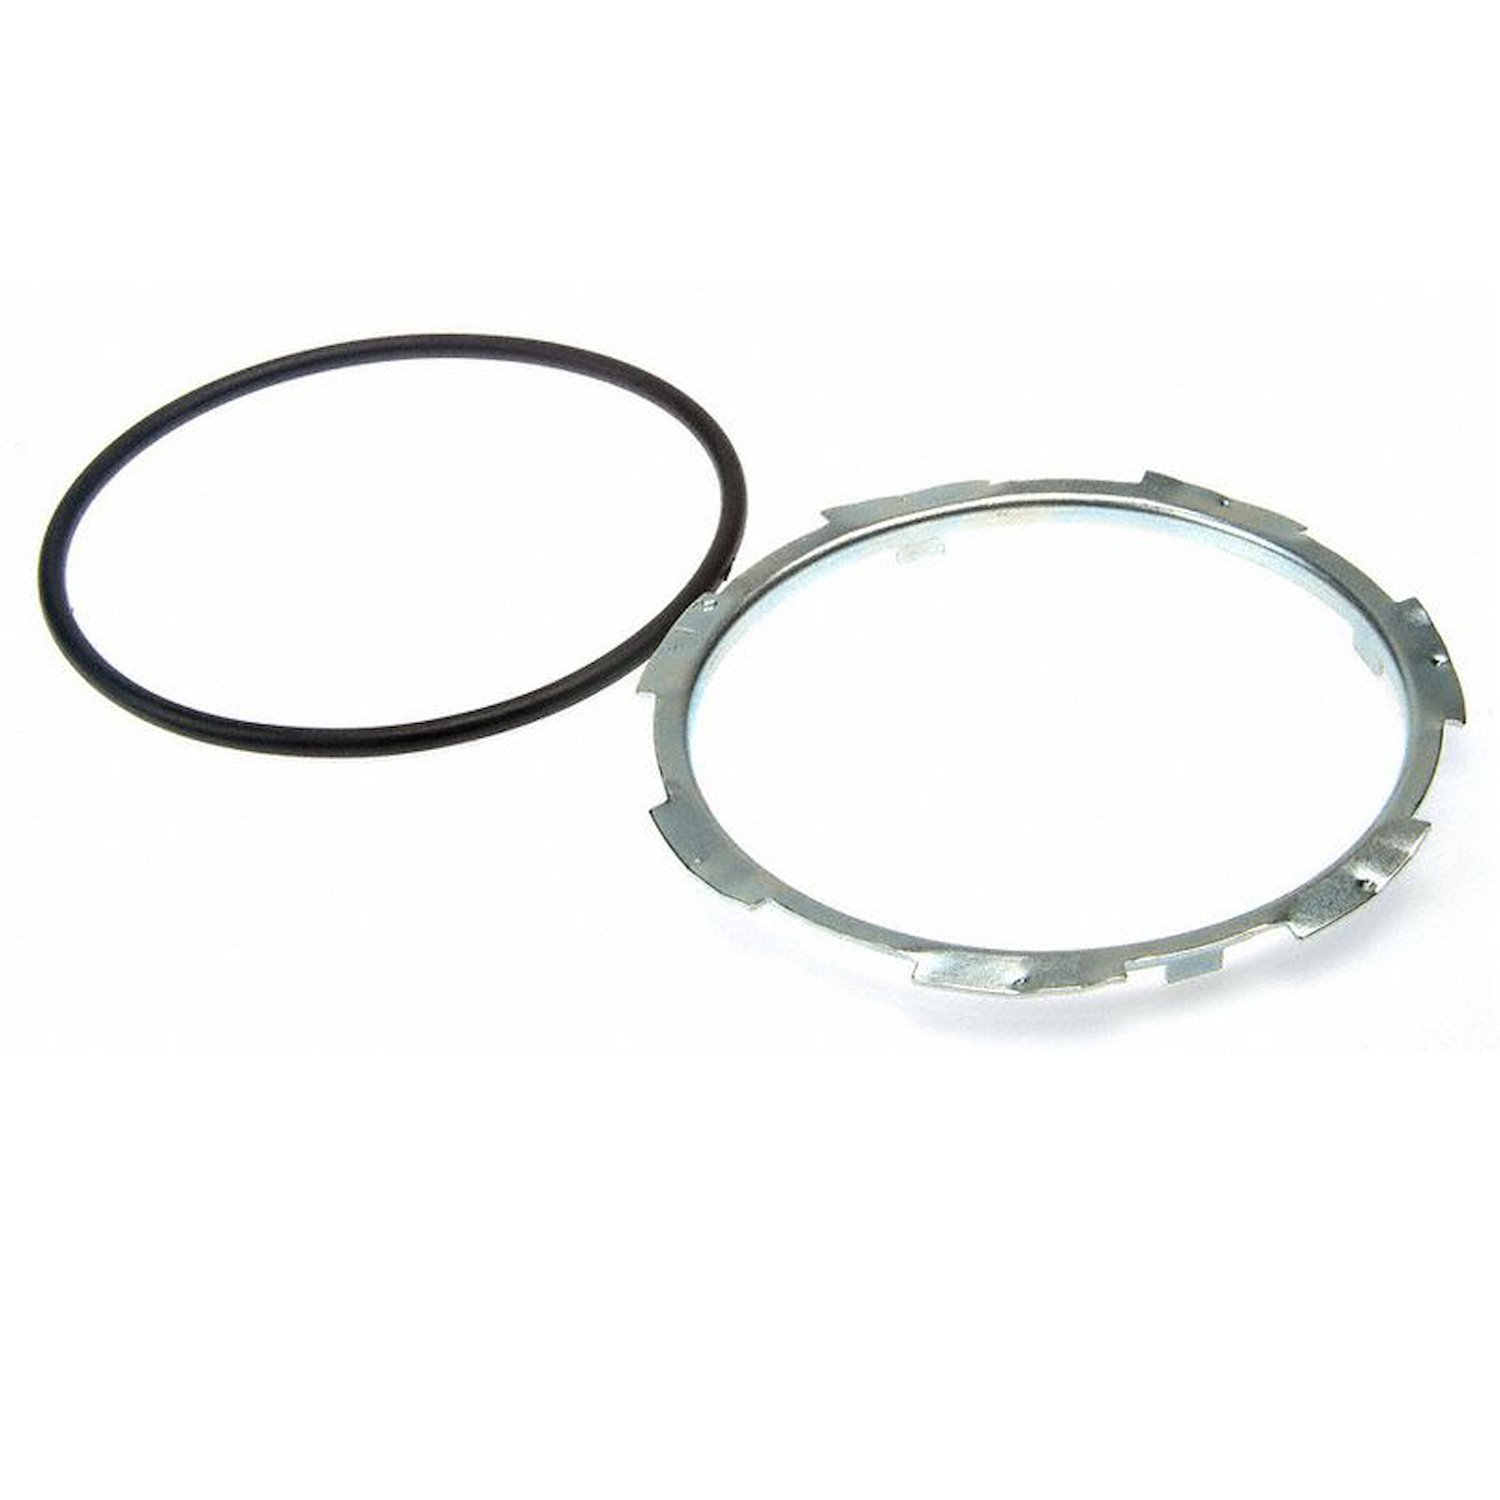 Fuel Tank Lock Ring for 1986-1996 Ford/Lincoln/Mercury